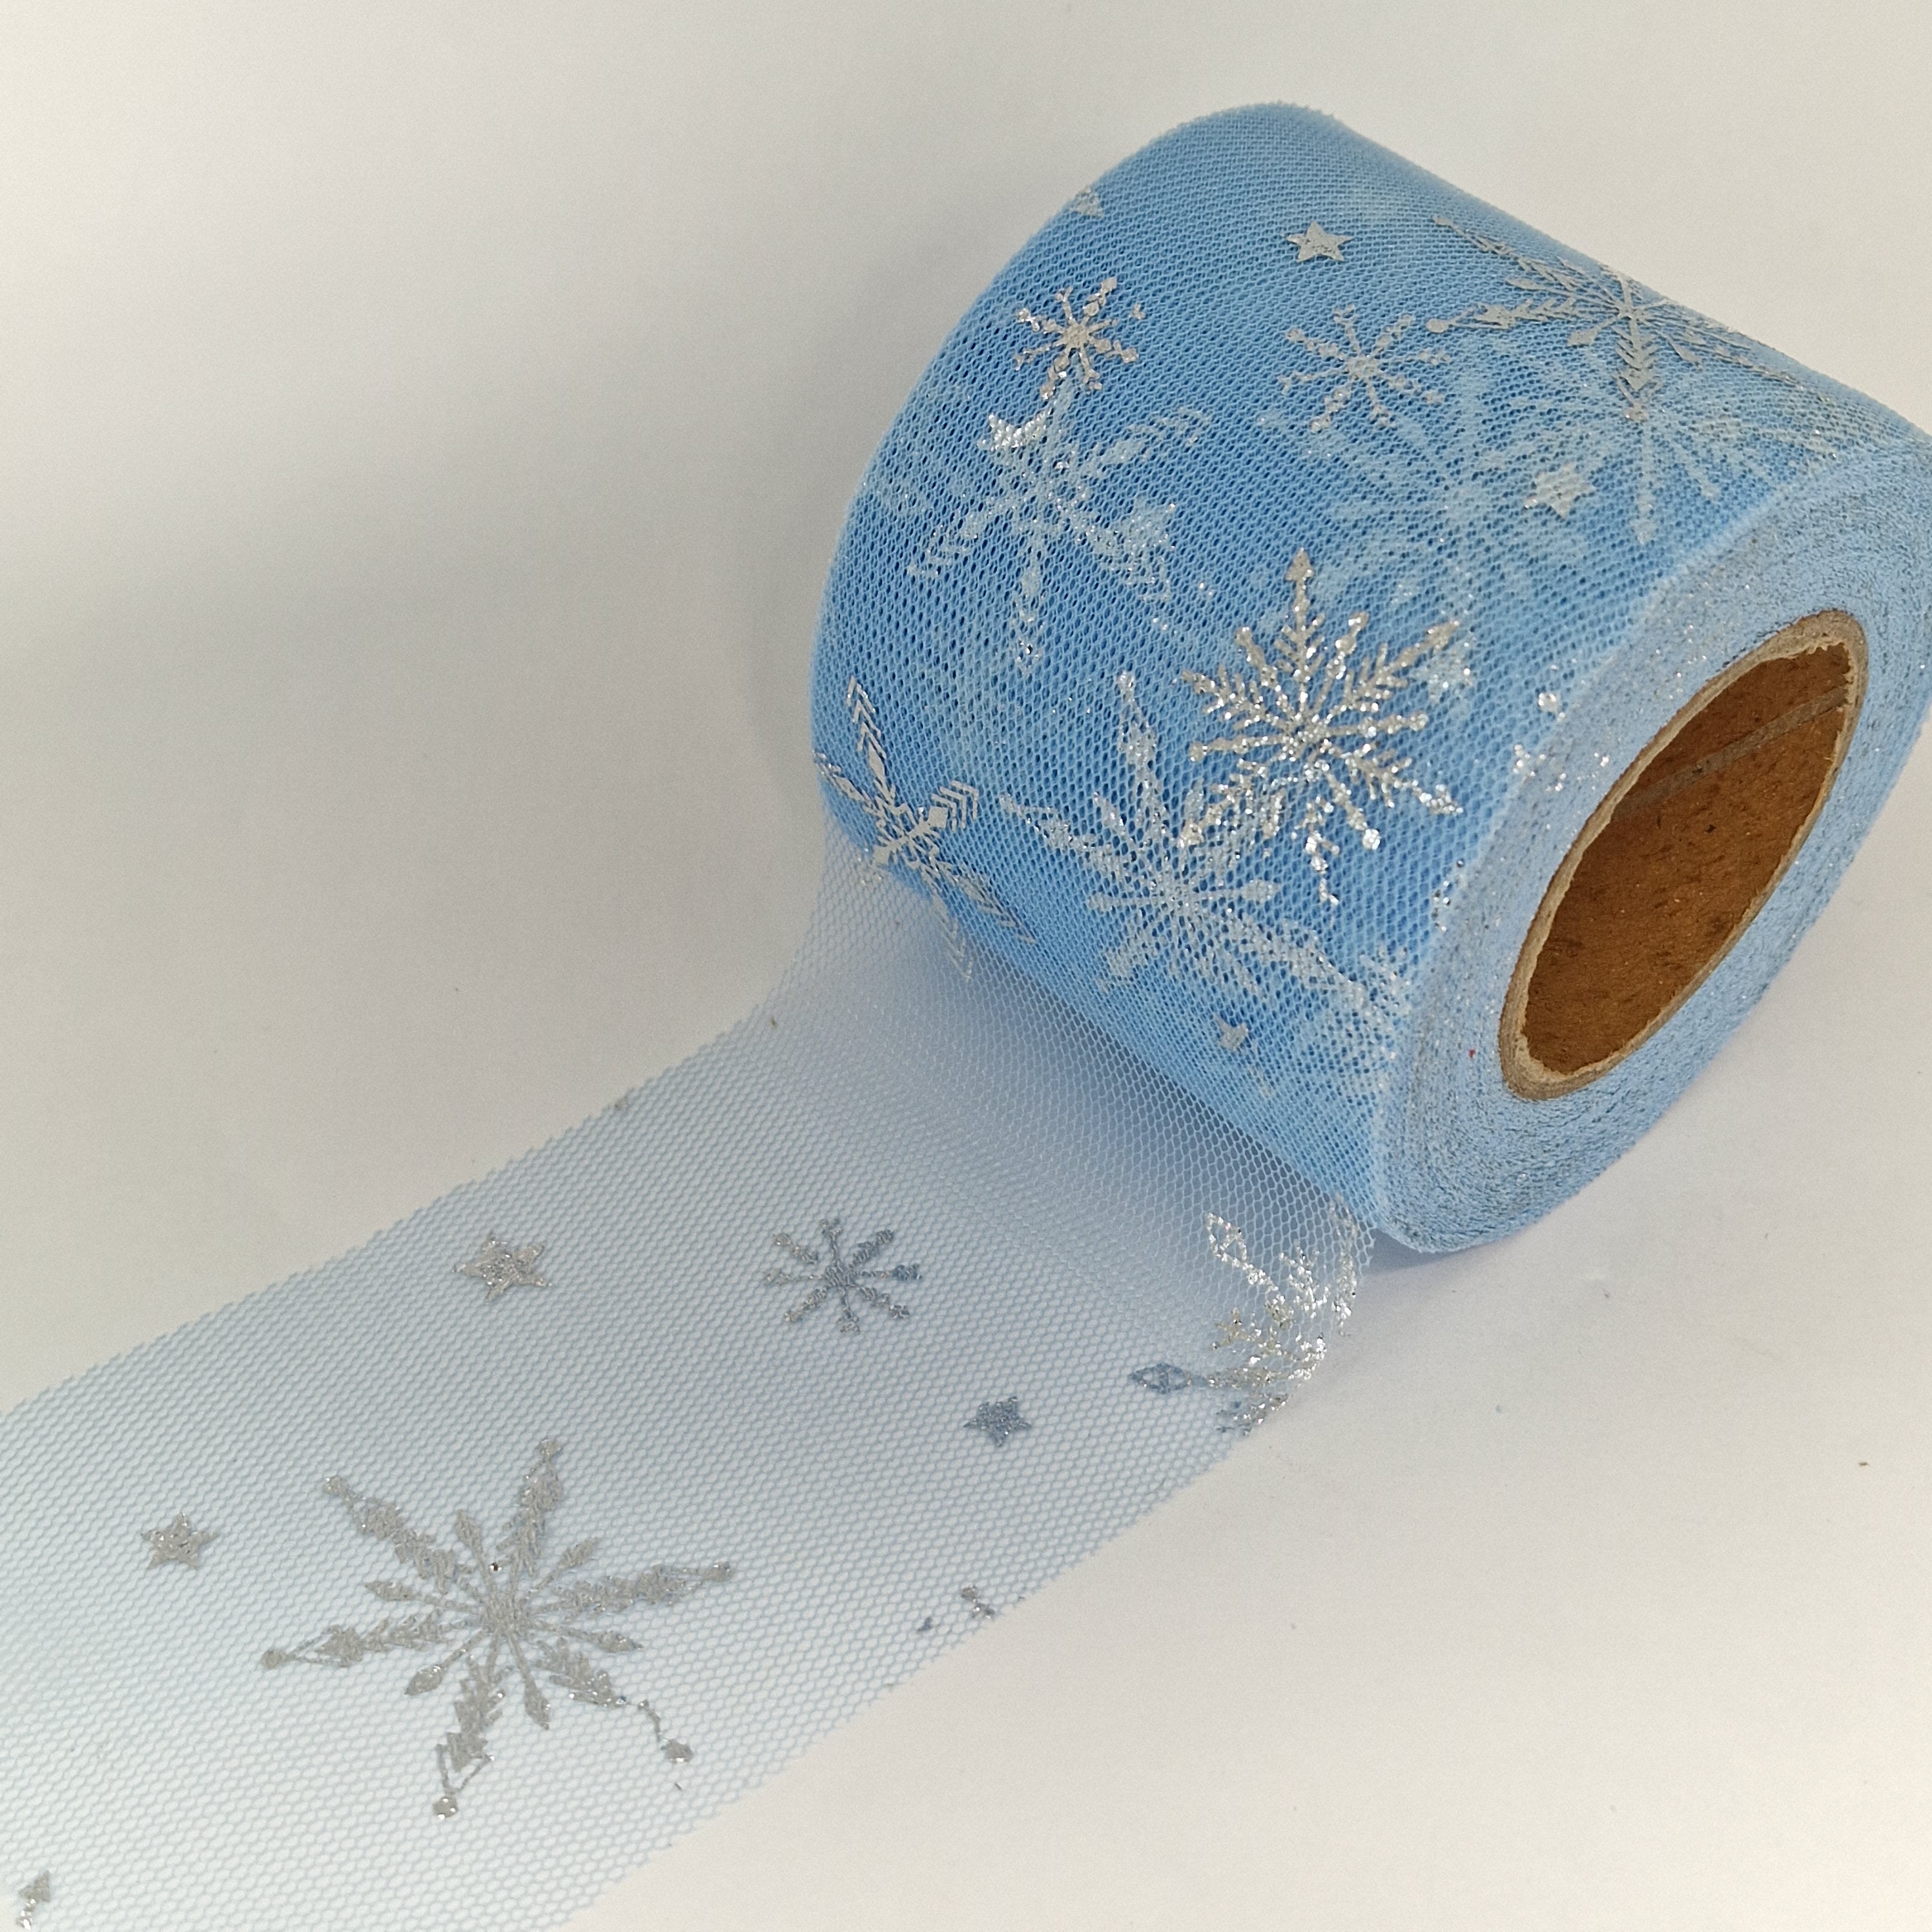 MajorCrafts 60mm 22metres Light Blue with Silver Snowflakes Tulle Mesh Ribbon